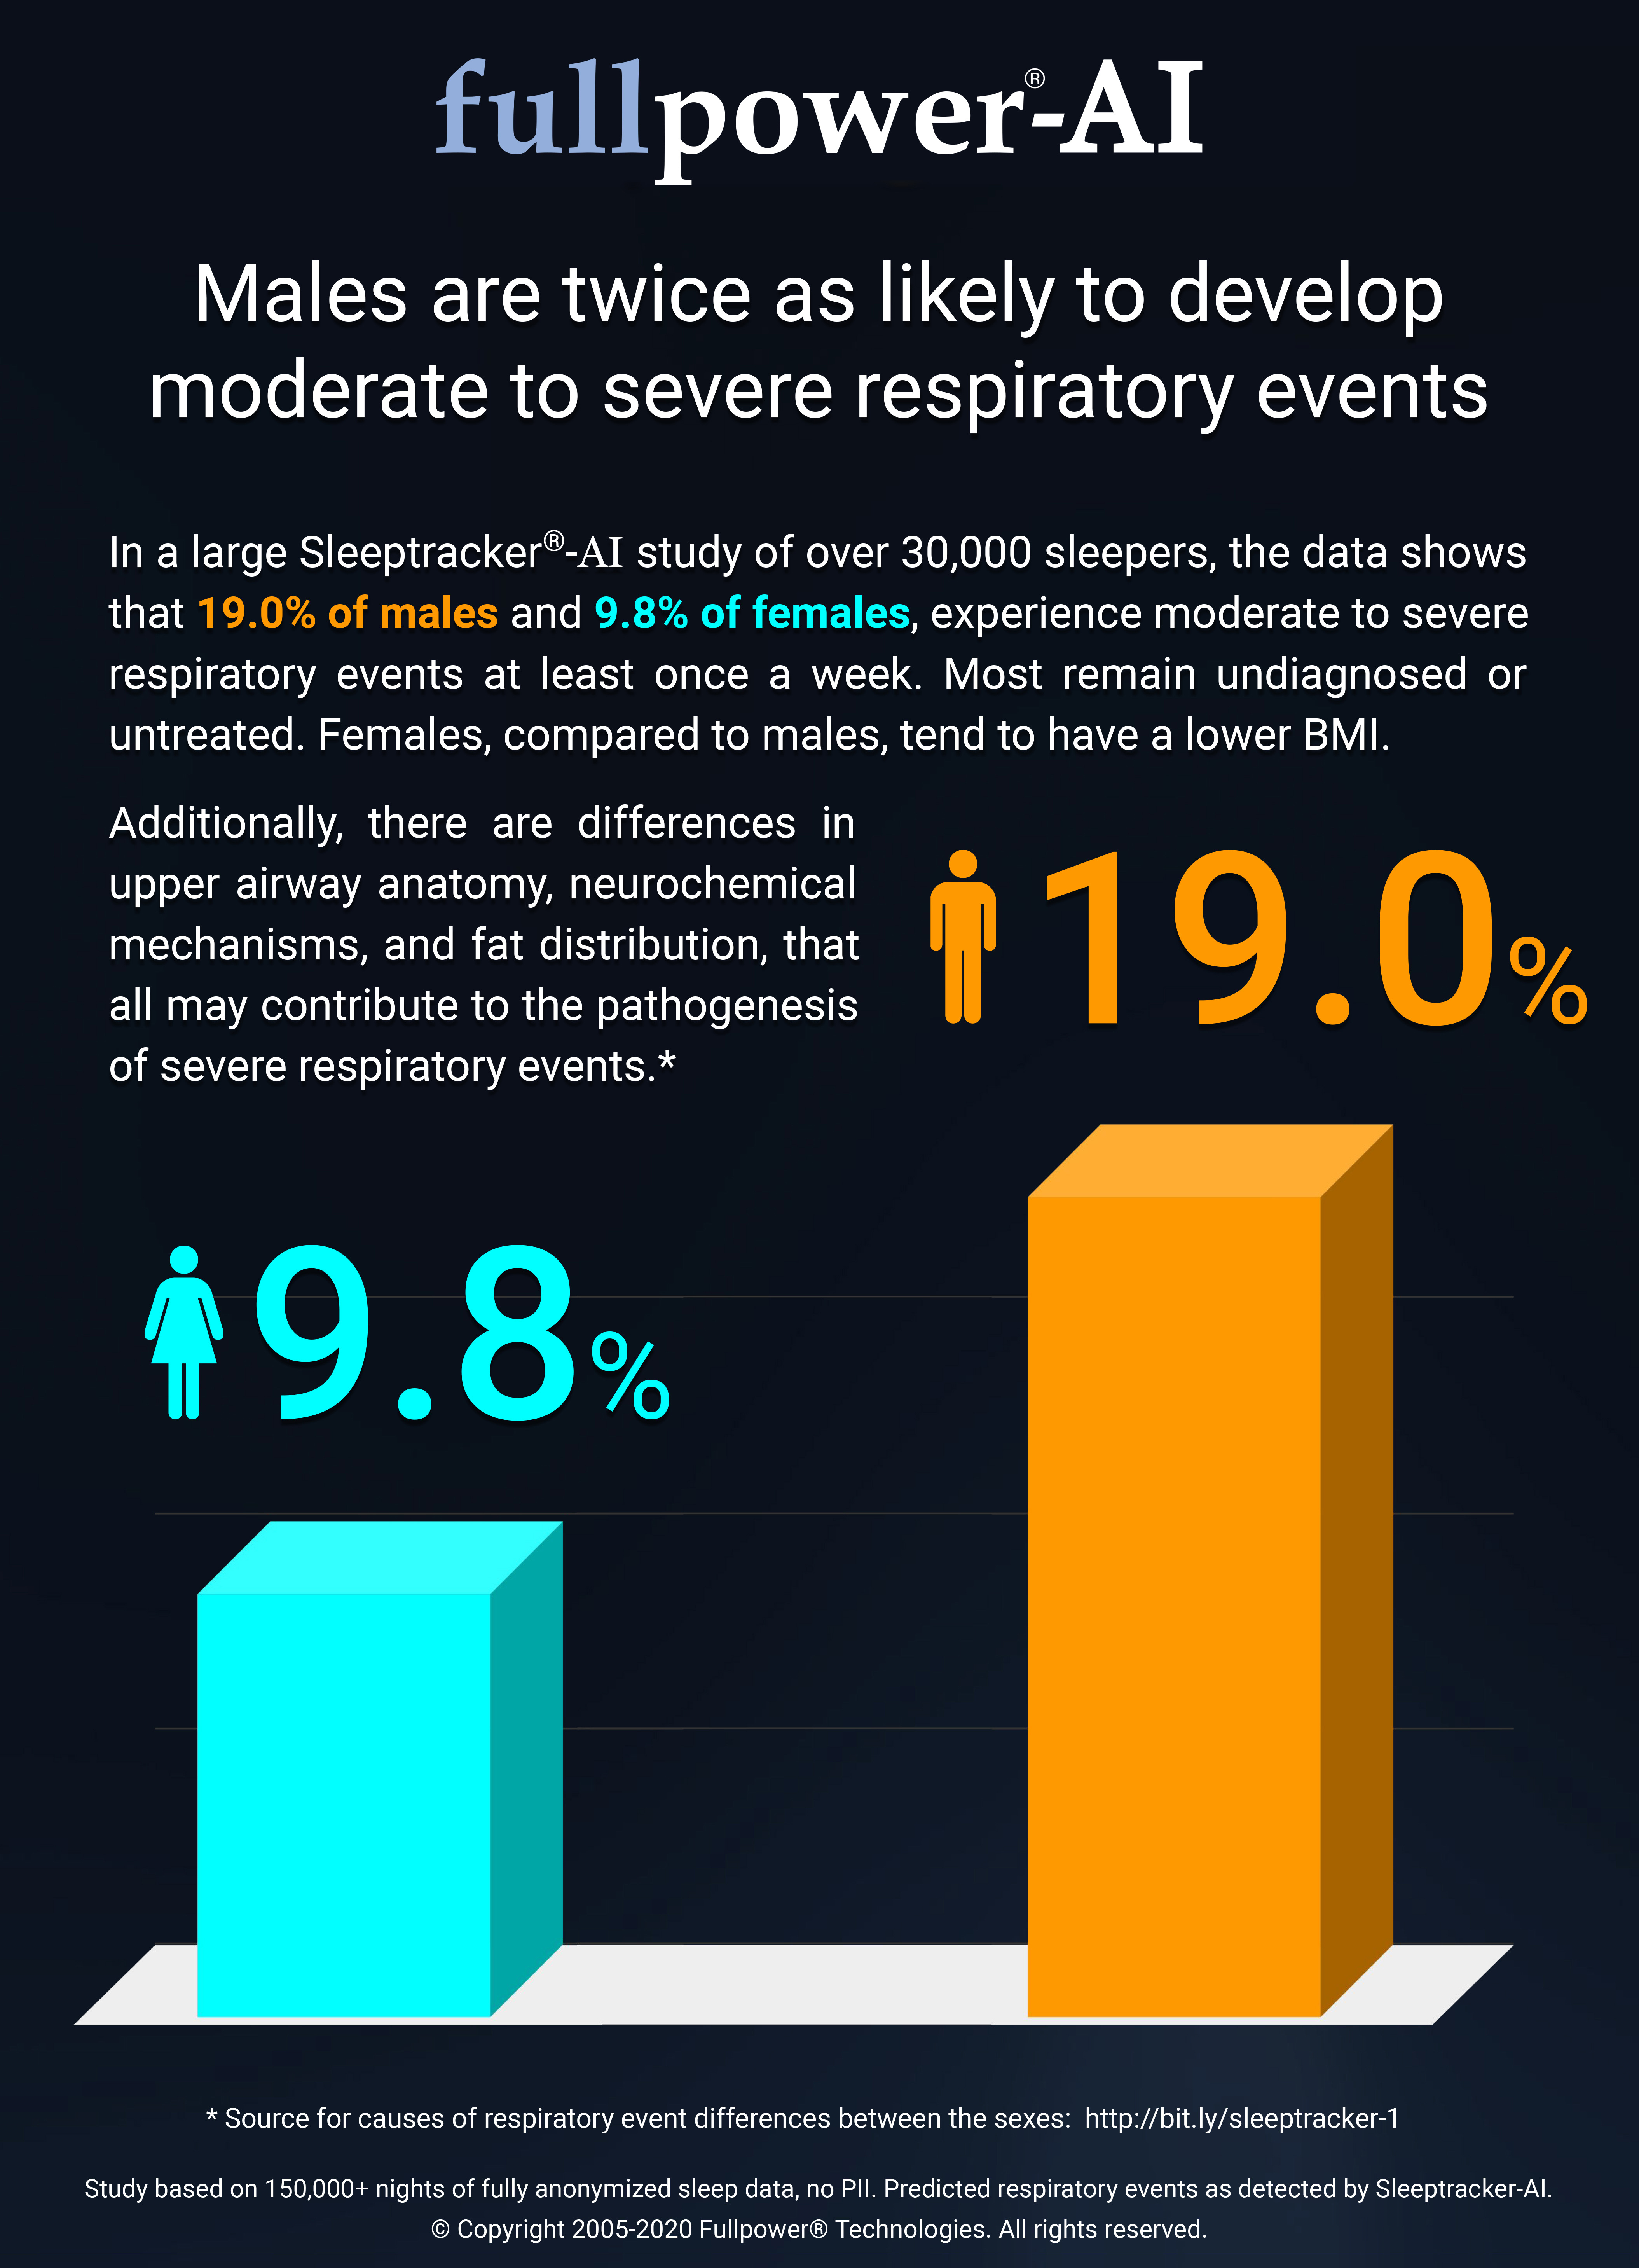 Males are twice as likely to develop moderate to severe respiratory events